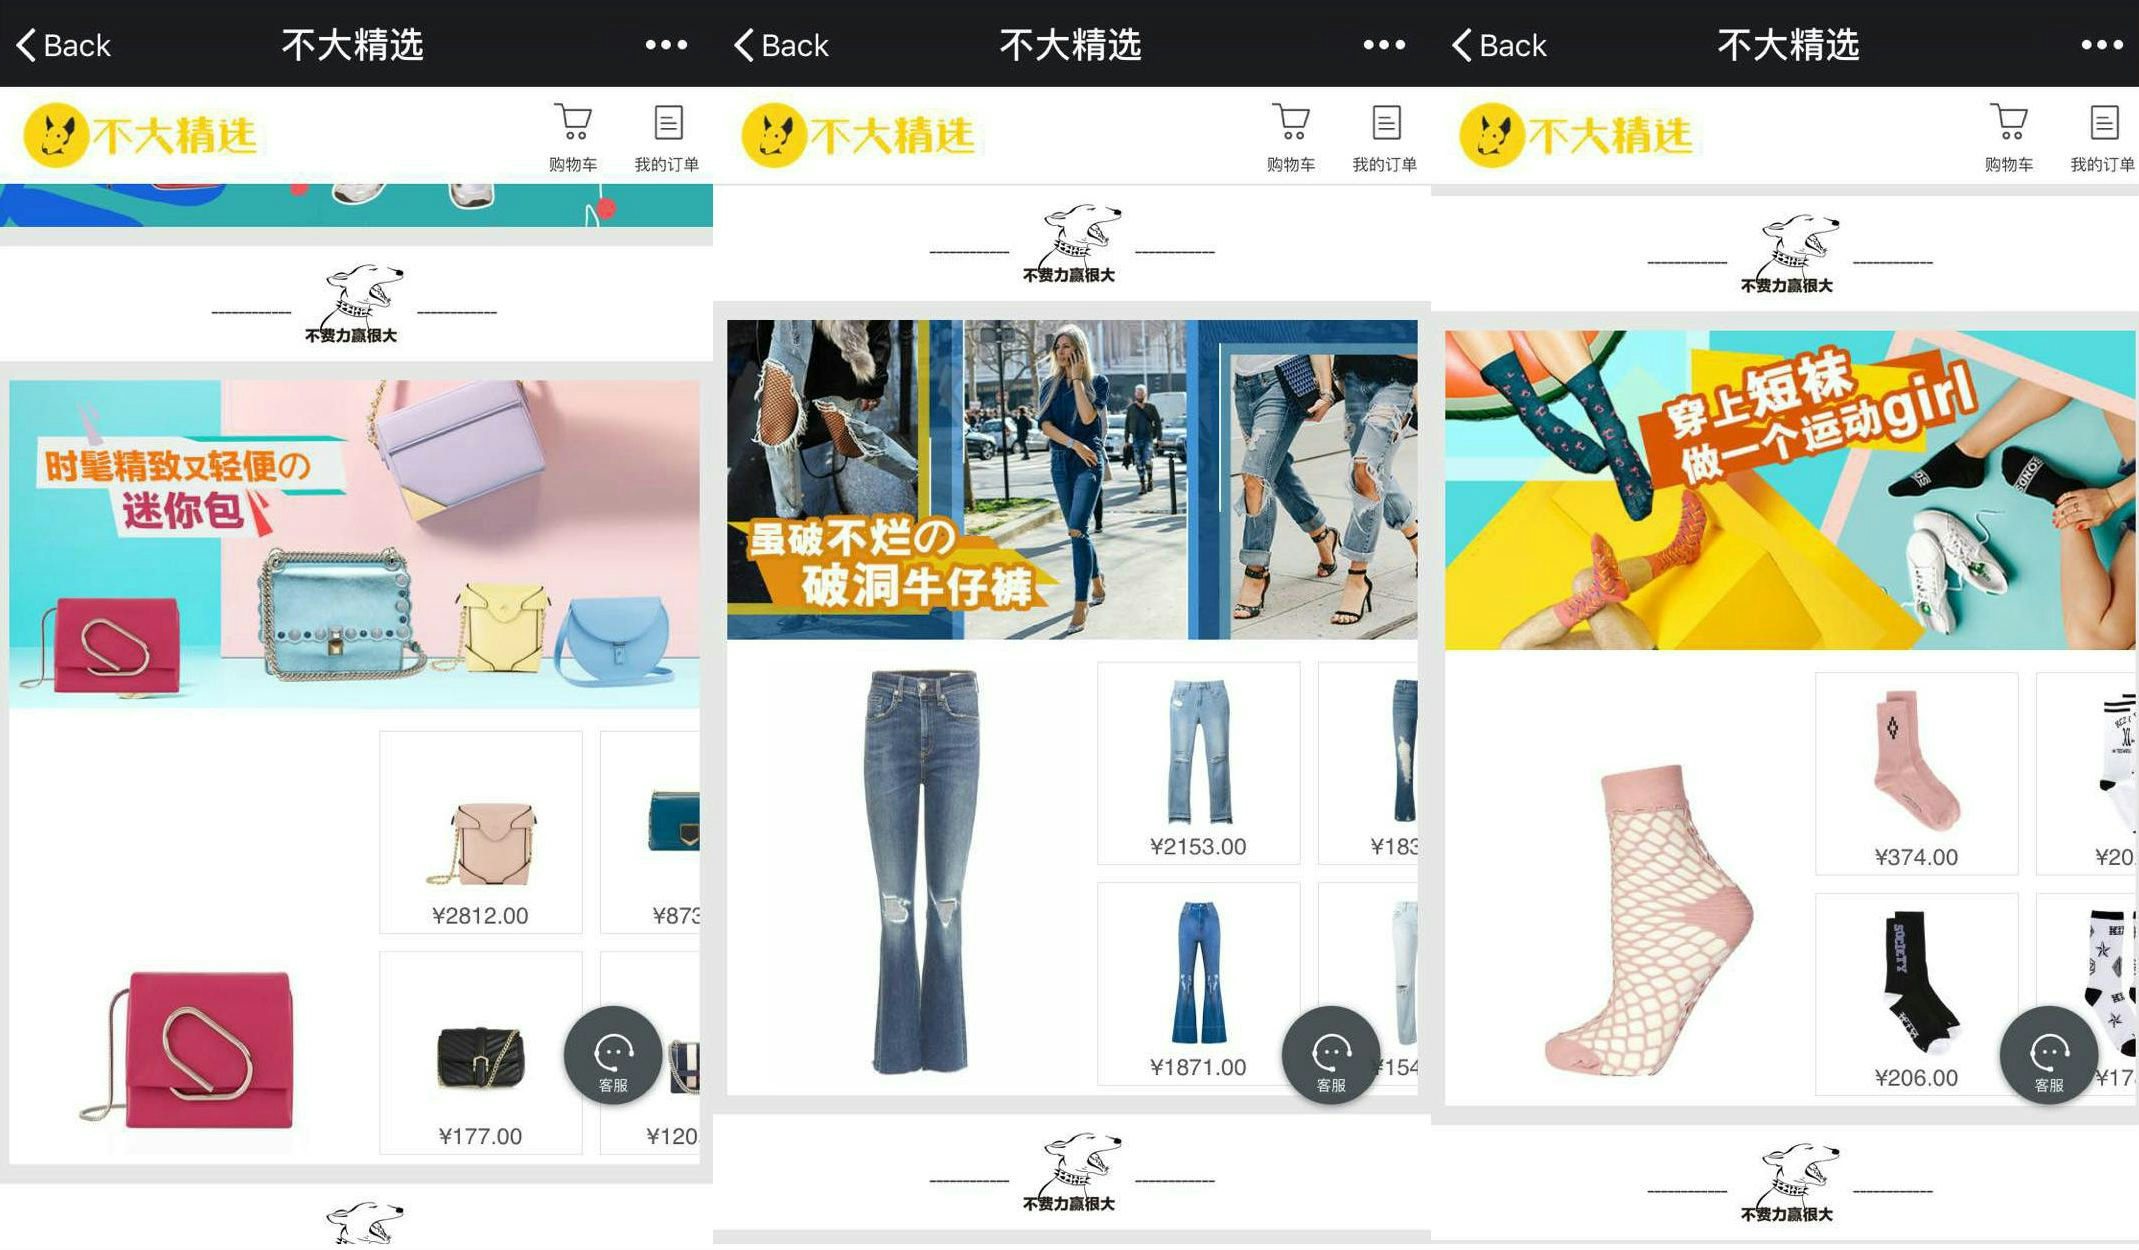 Gogoboi recently launched a new WeChat store, called Bu Da Jing Xuan (不大精选), which curates and sells premium and luxury fashion goods from top e-commerce sites in China.